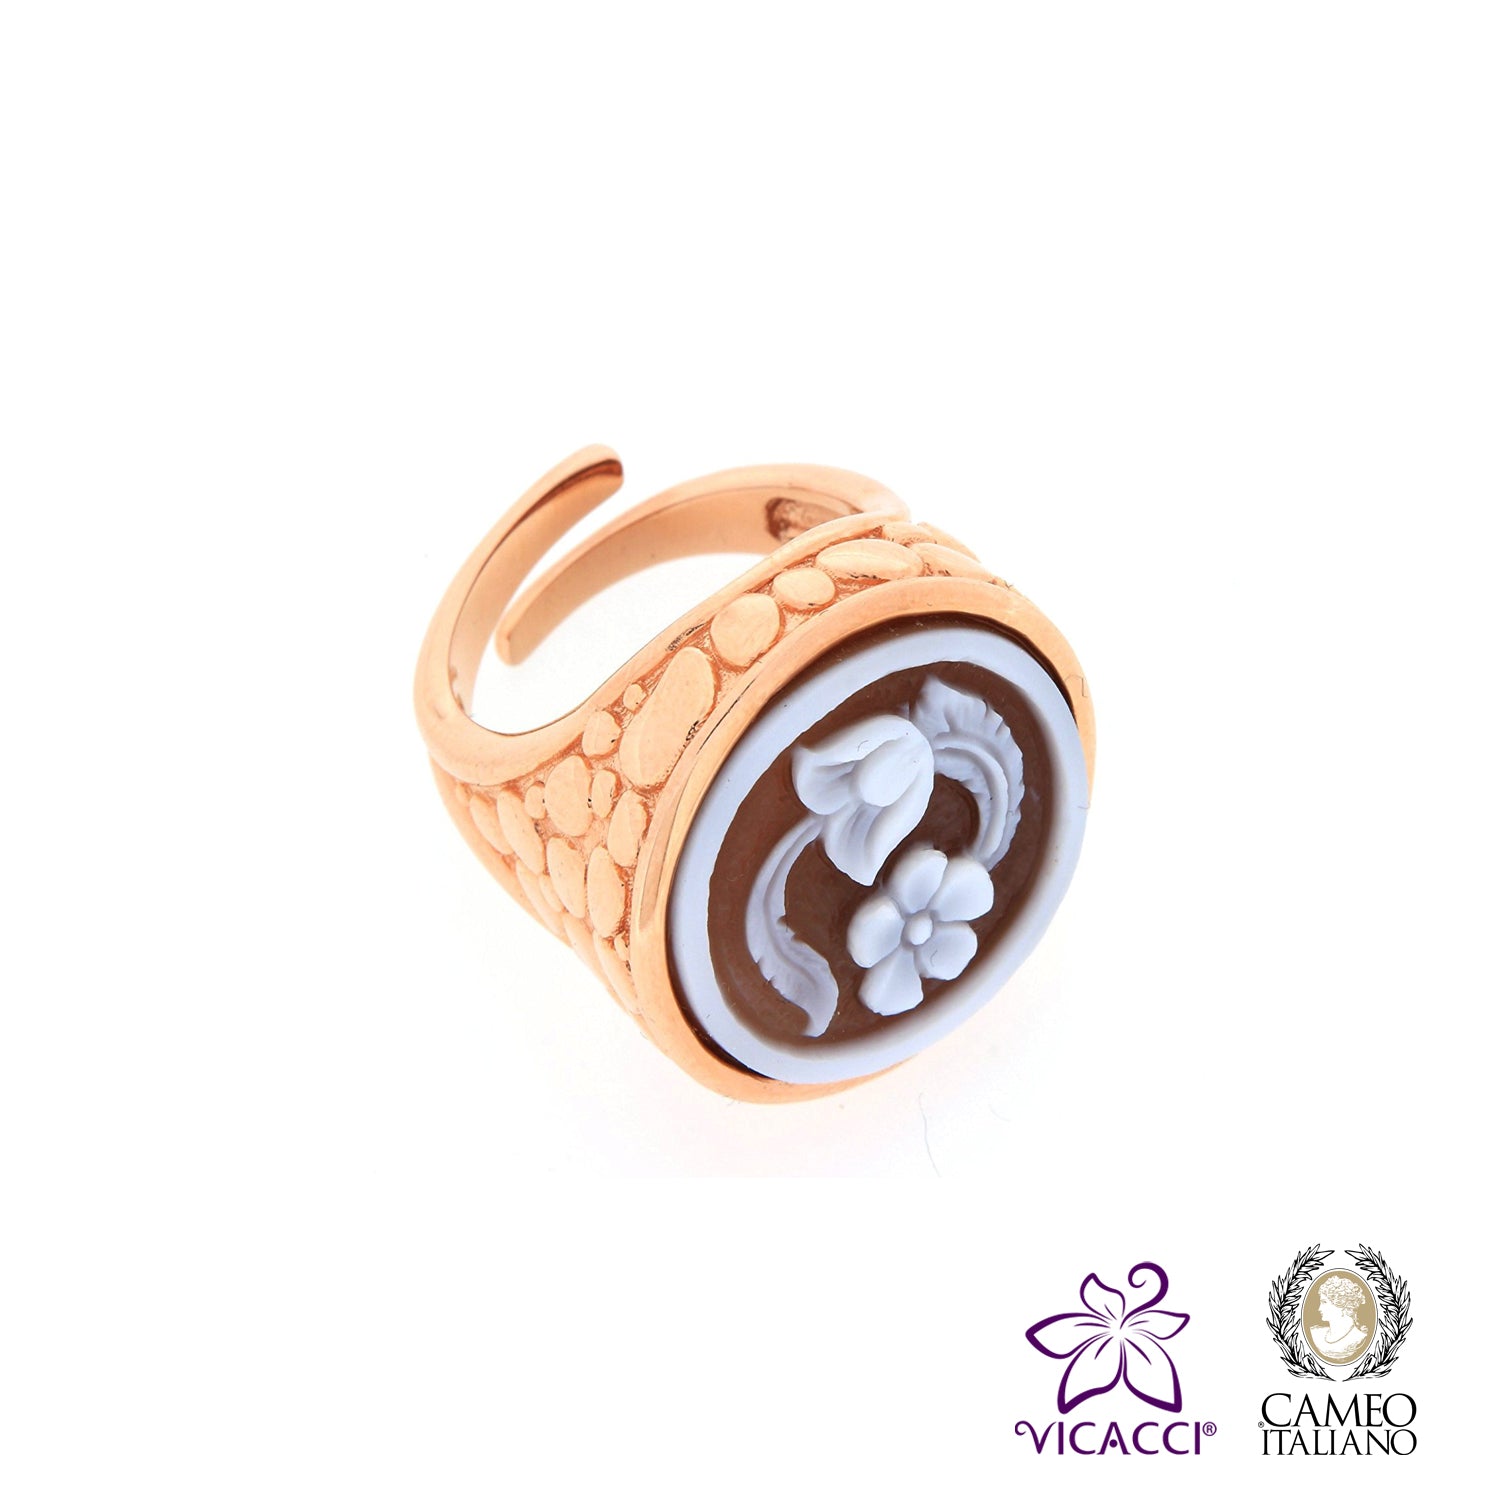 Cameo Italiano, A27 Ring, Gold Plated Sterling Silver